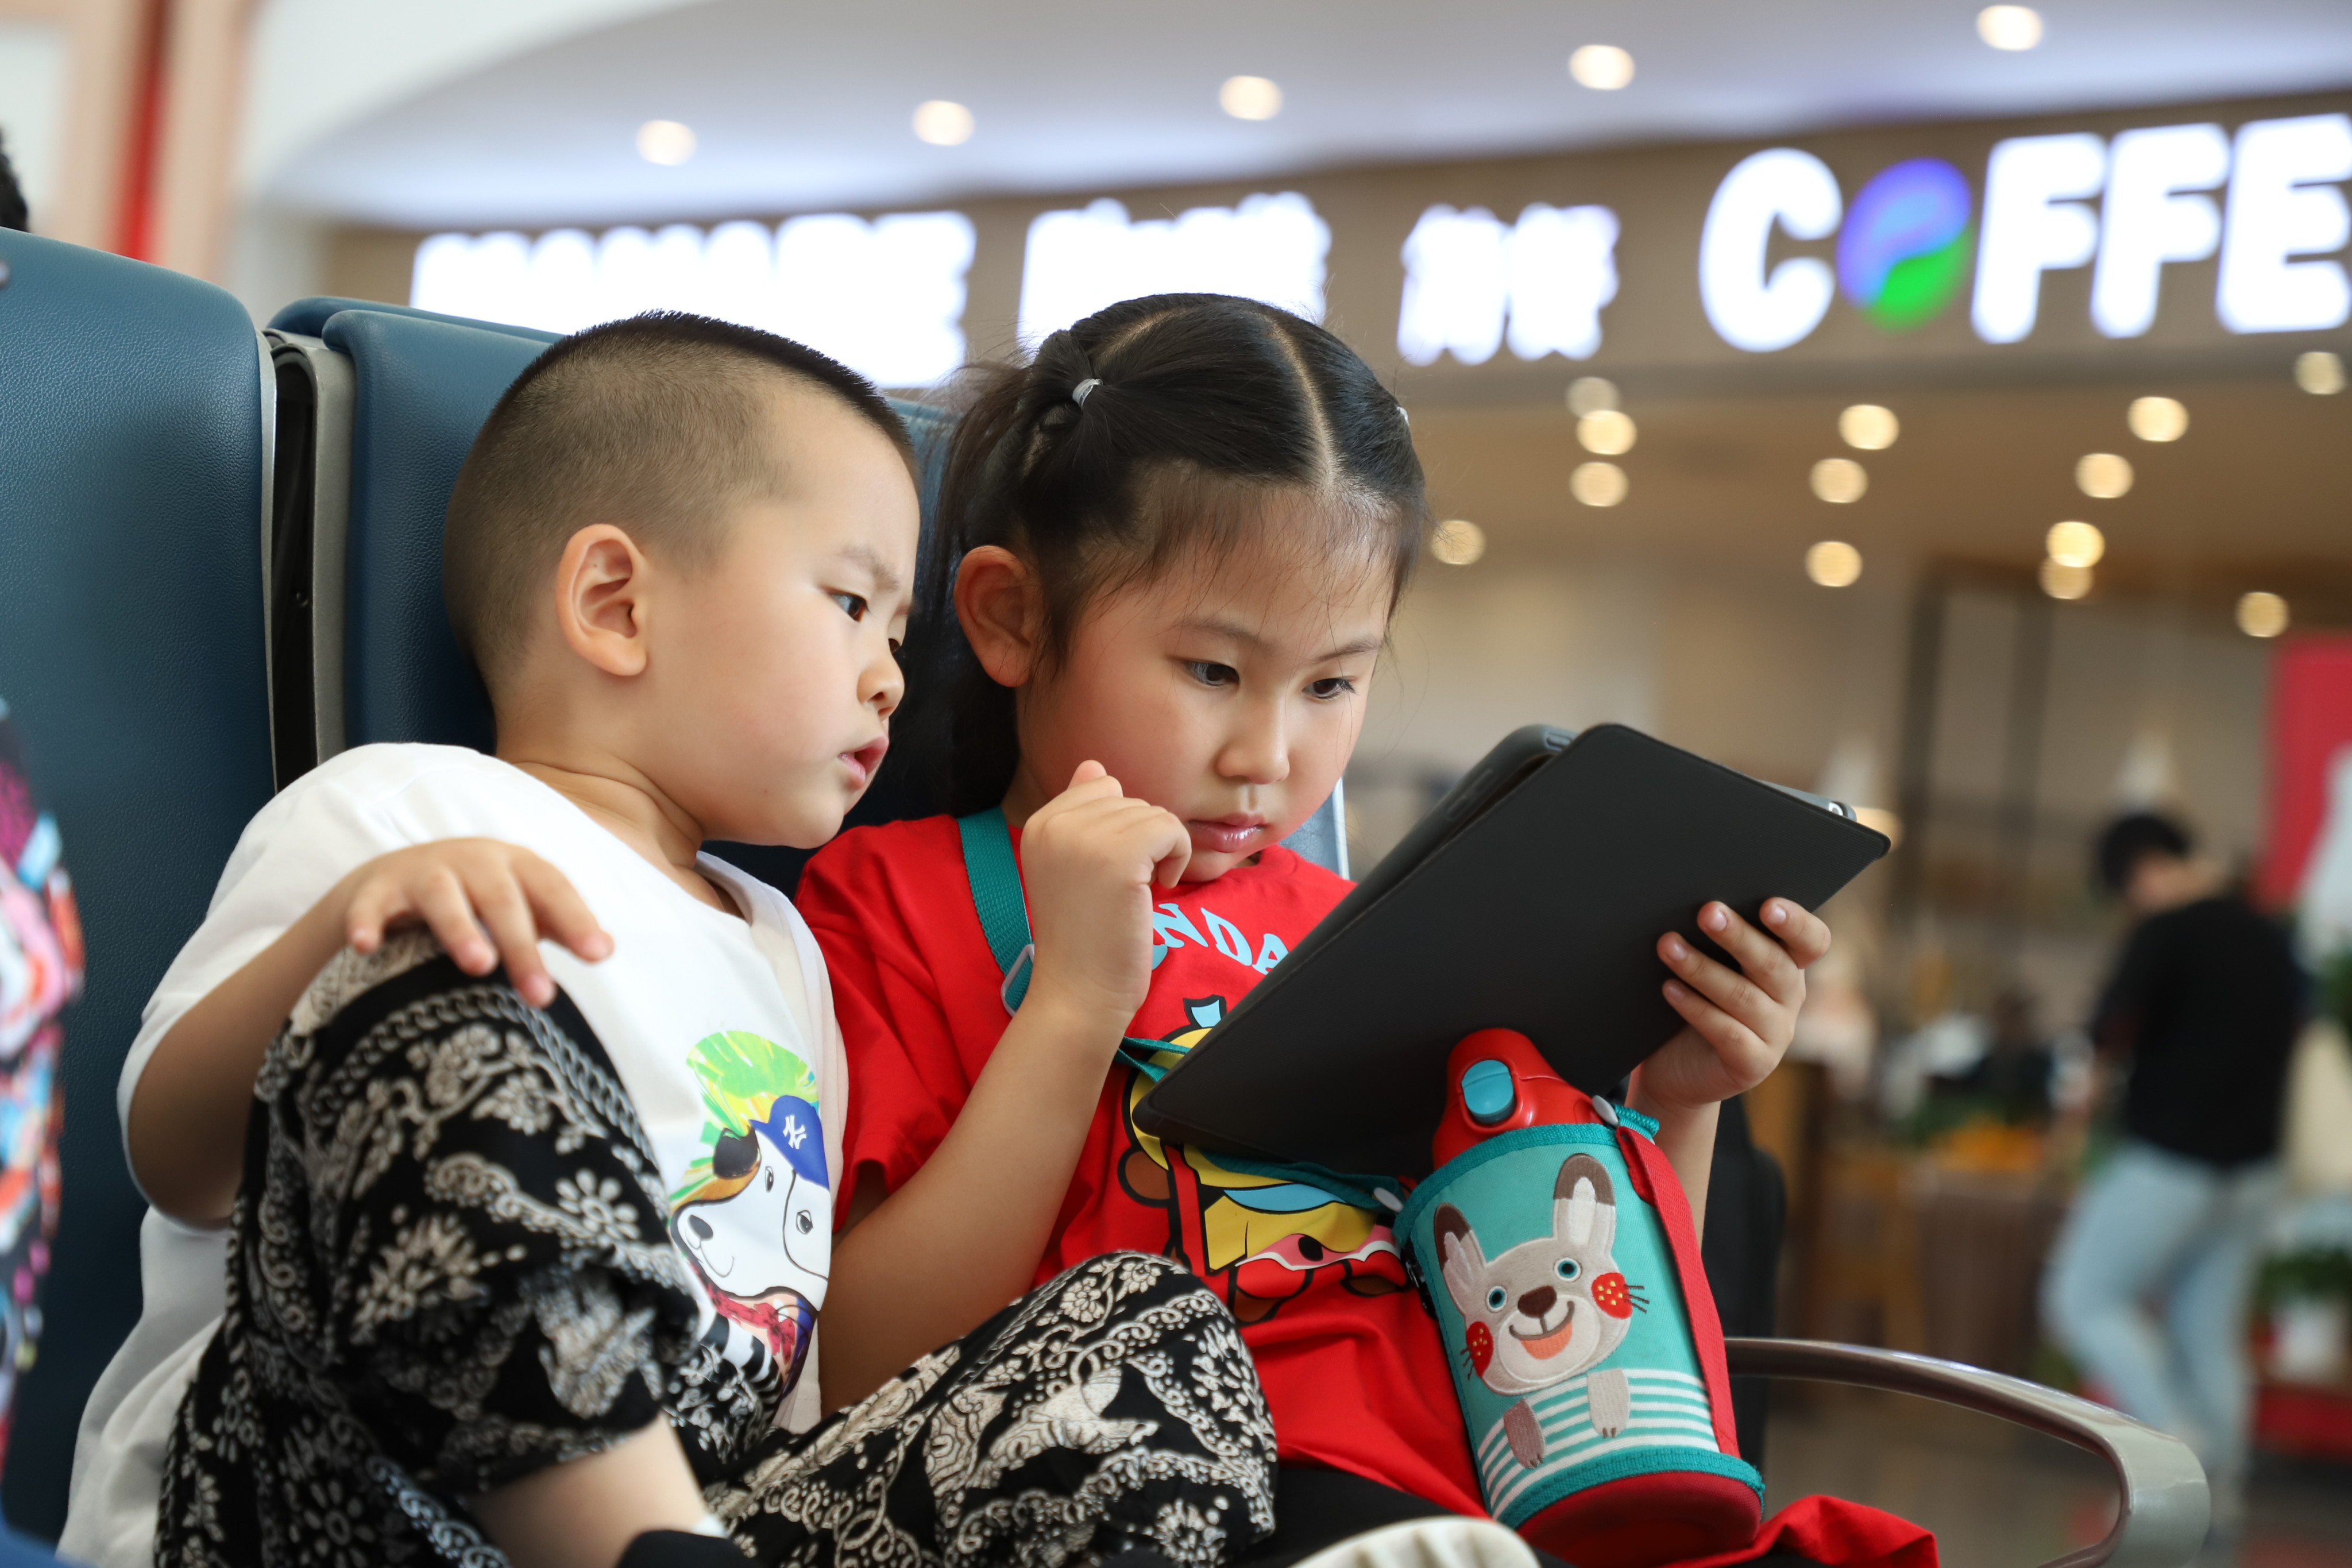 China has for years sought to combat what the government perceives as internet addiction among minors, leading to a slew of regulations from different government bodies. Photo: Shutterstock